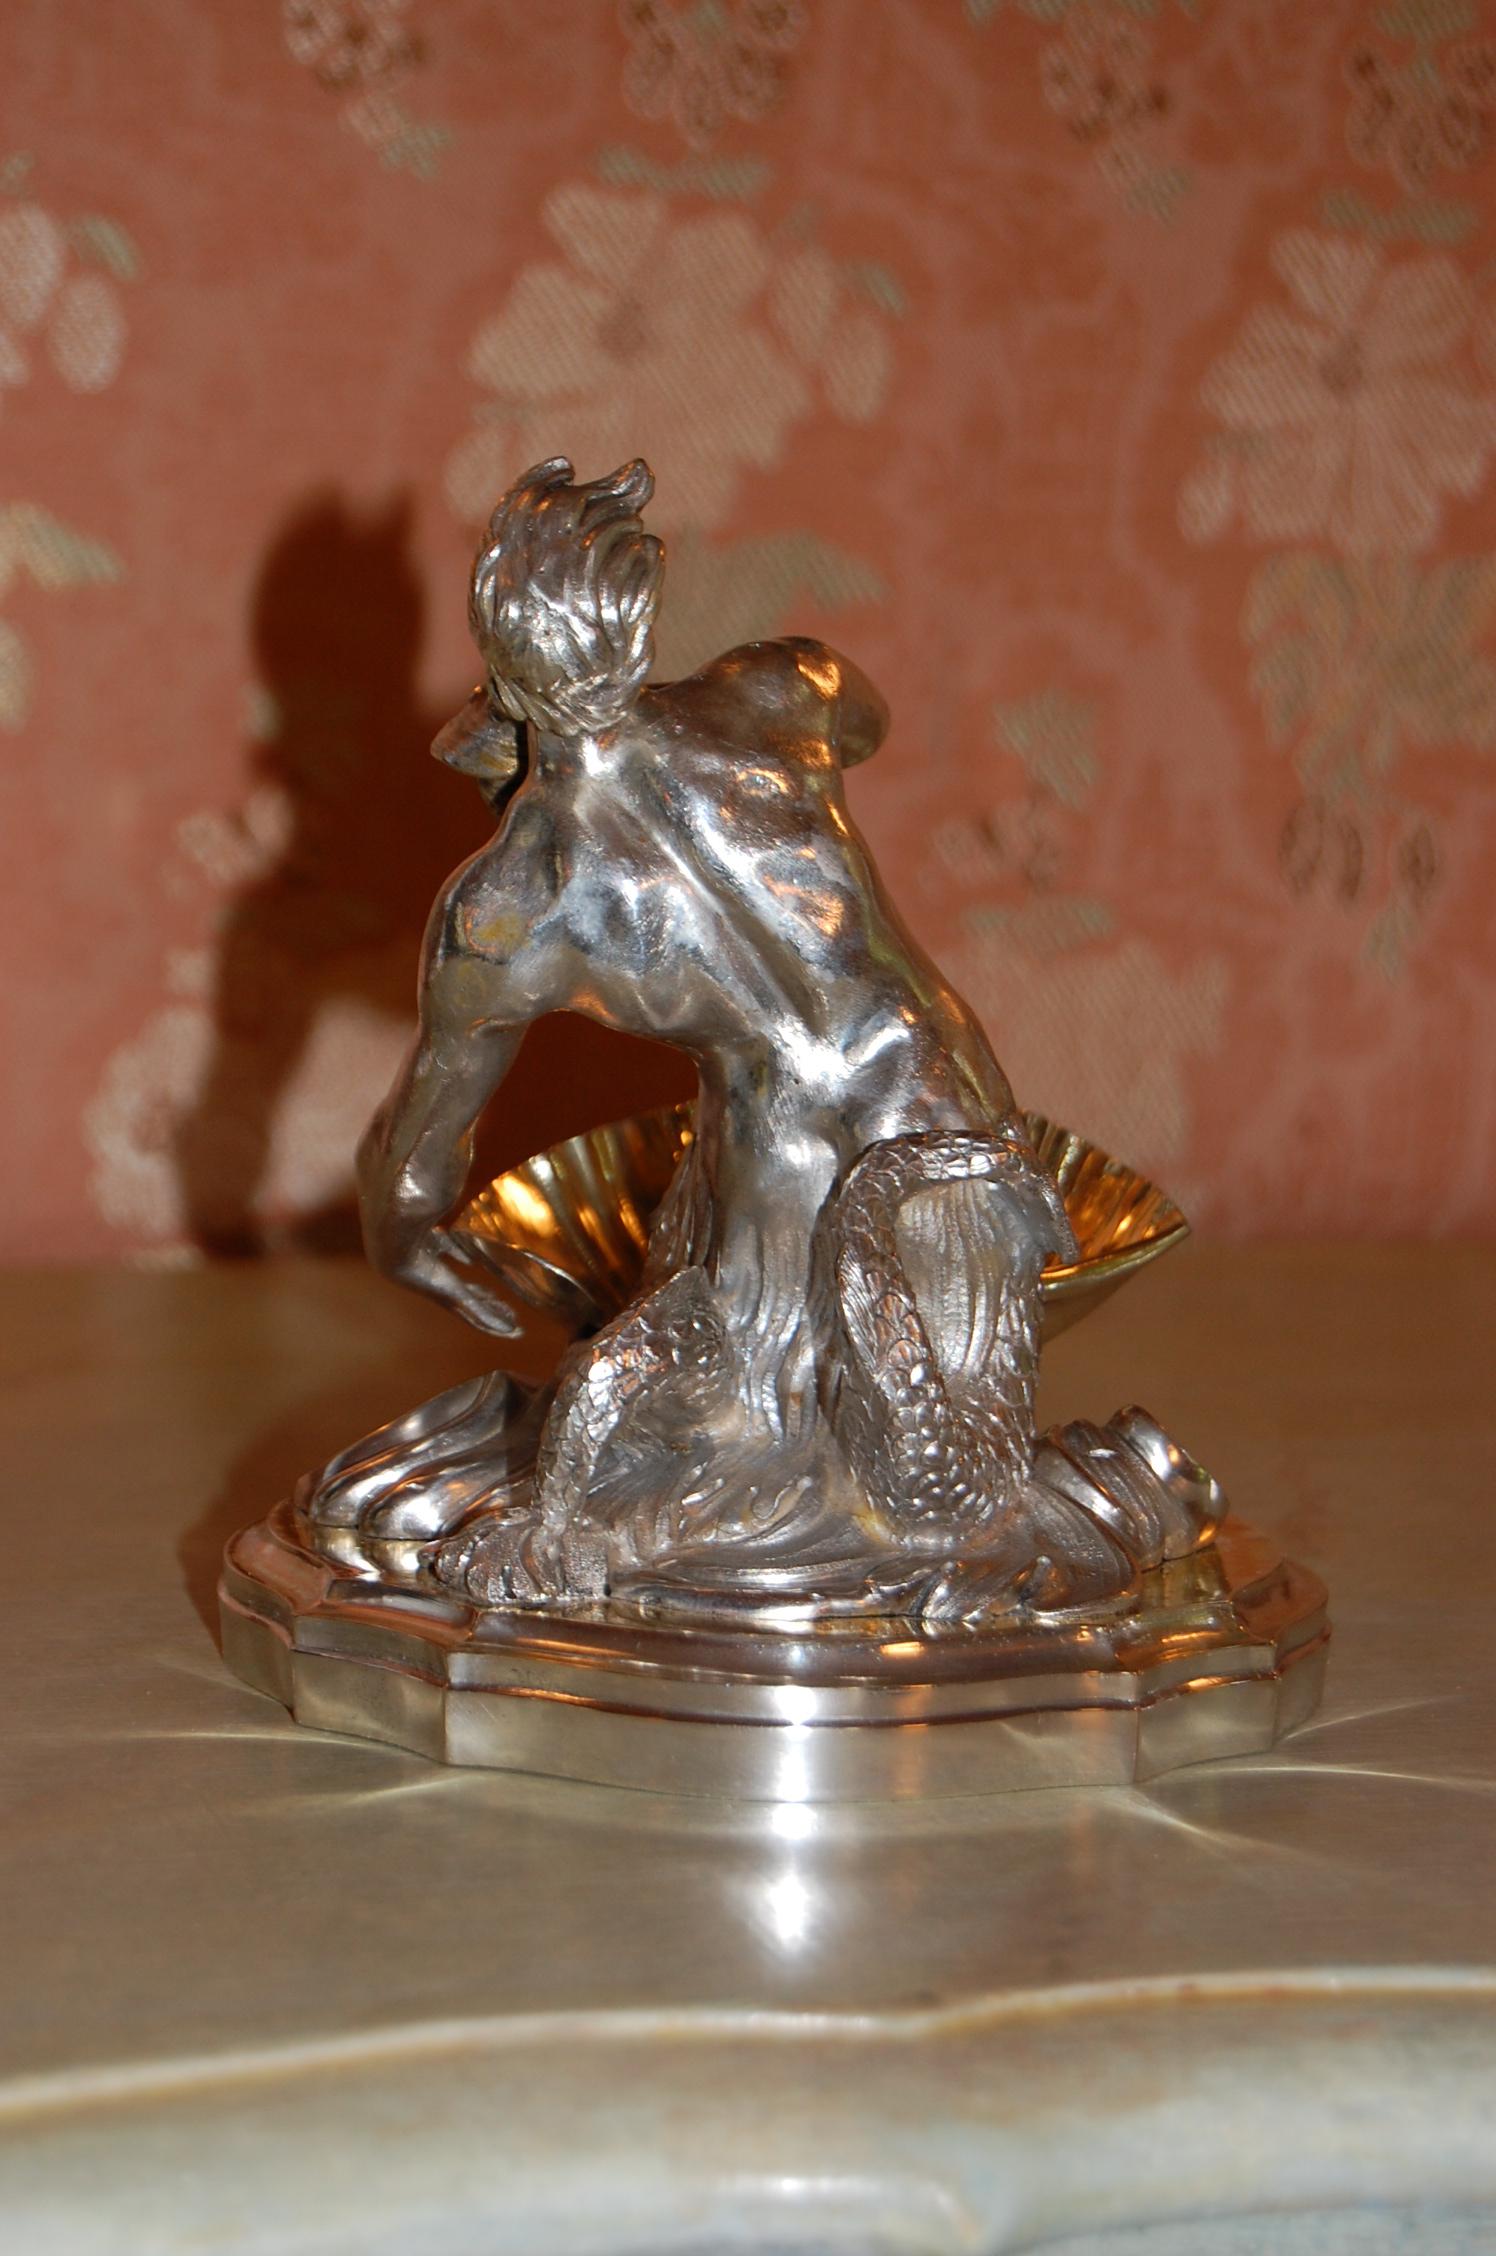 Lacquered Silver Plated Candy/ Nut Bowls Depicting a Neptune God-Like Mermaid Figure, Pair For Sale